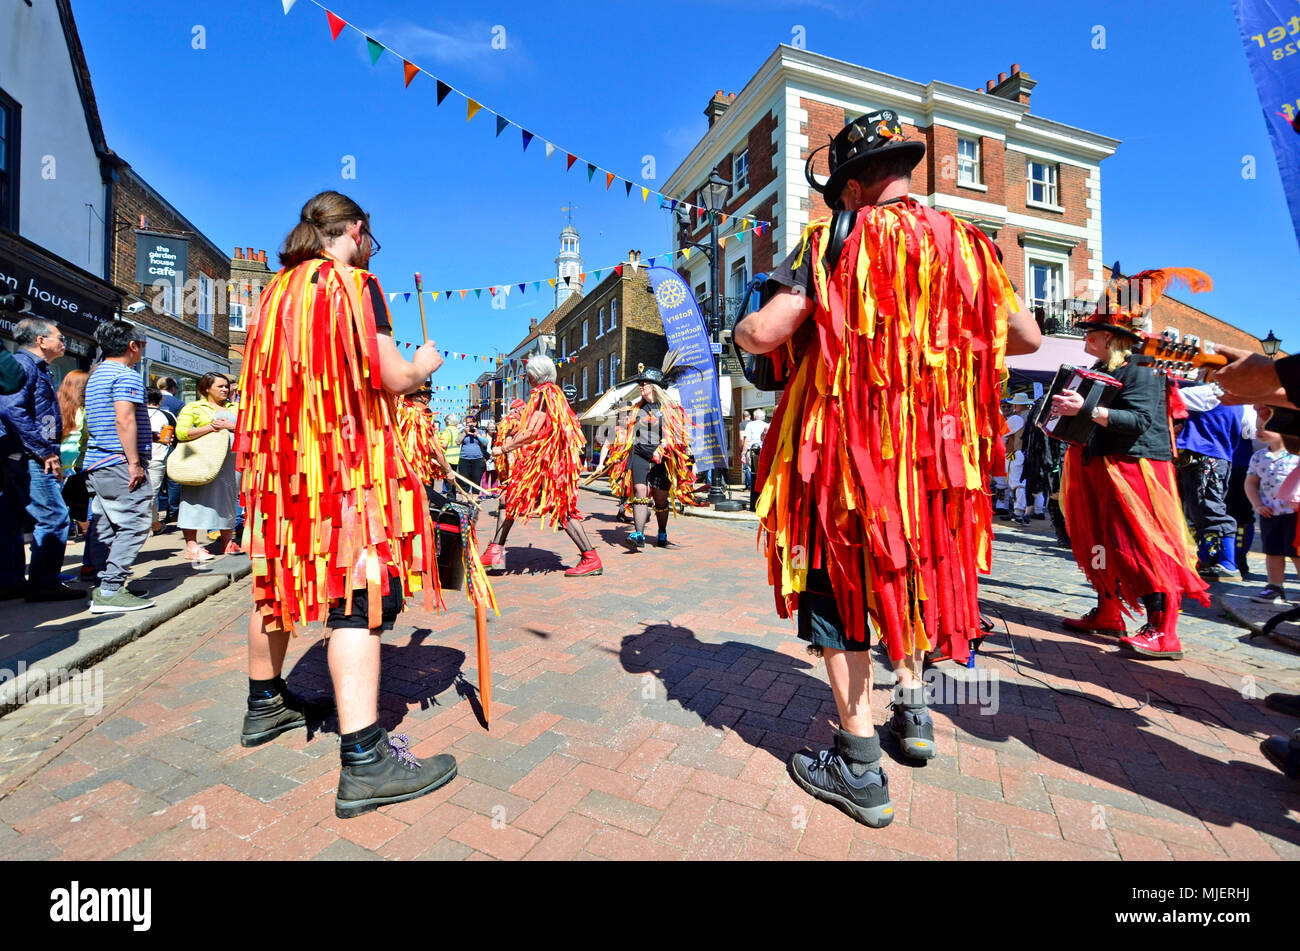 Rochester, Kent, UK. 5th May 2018. Perfect weather for the first day of the annual Rochester Sweeps Festival, taking place over all three days of the Bank Holiday weekend, celebrating the traditional holiday that chimney sweeps used to enjoy on May Day. A lot more Morris dancers than sweeps in evidence these days. Credit: PjrFoto/Alamy Live News Stock Photo